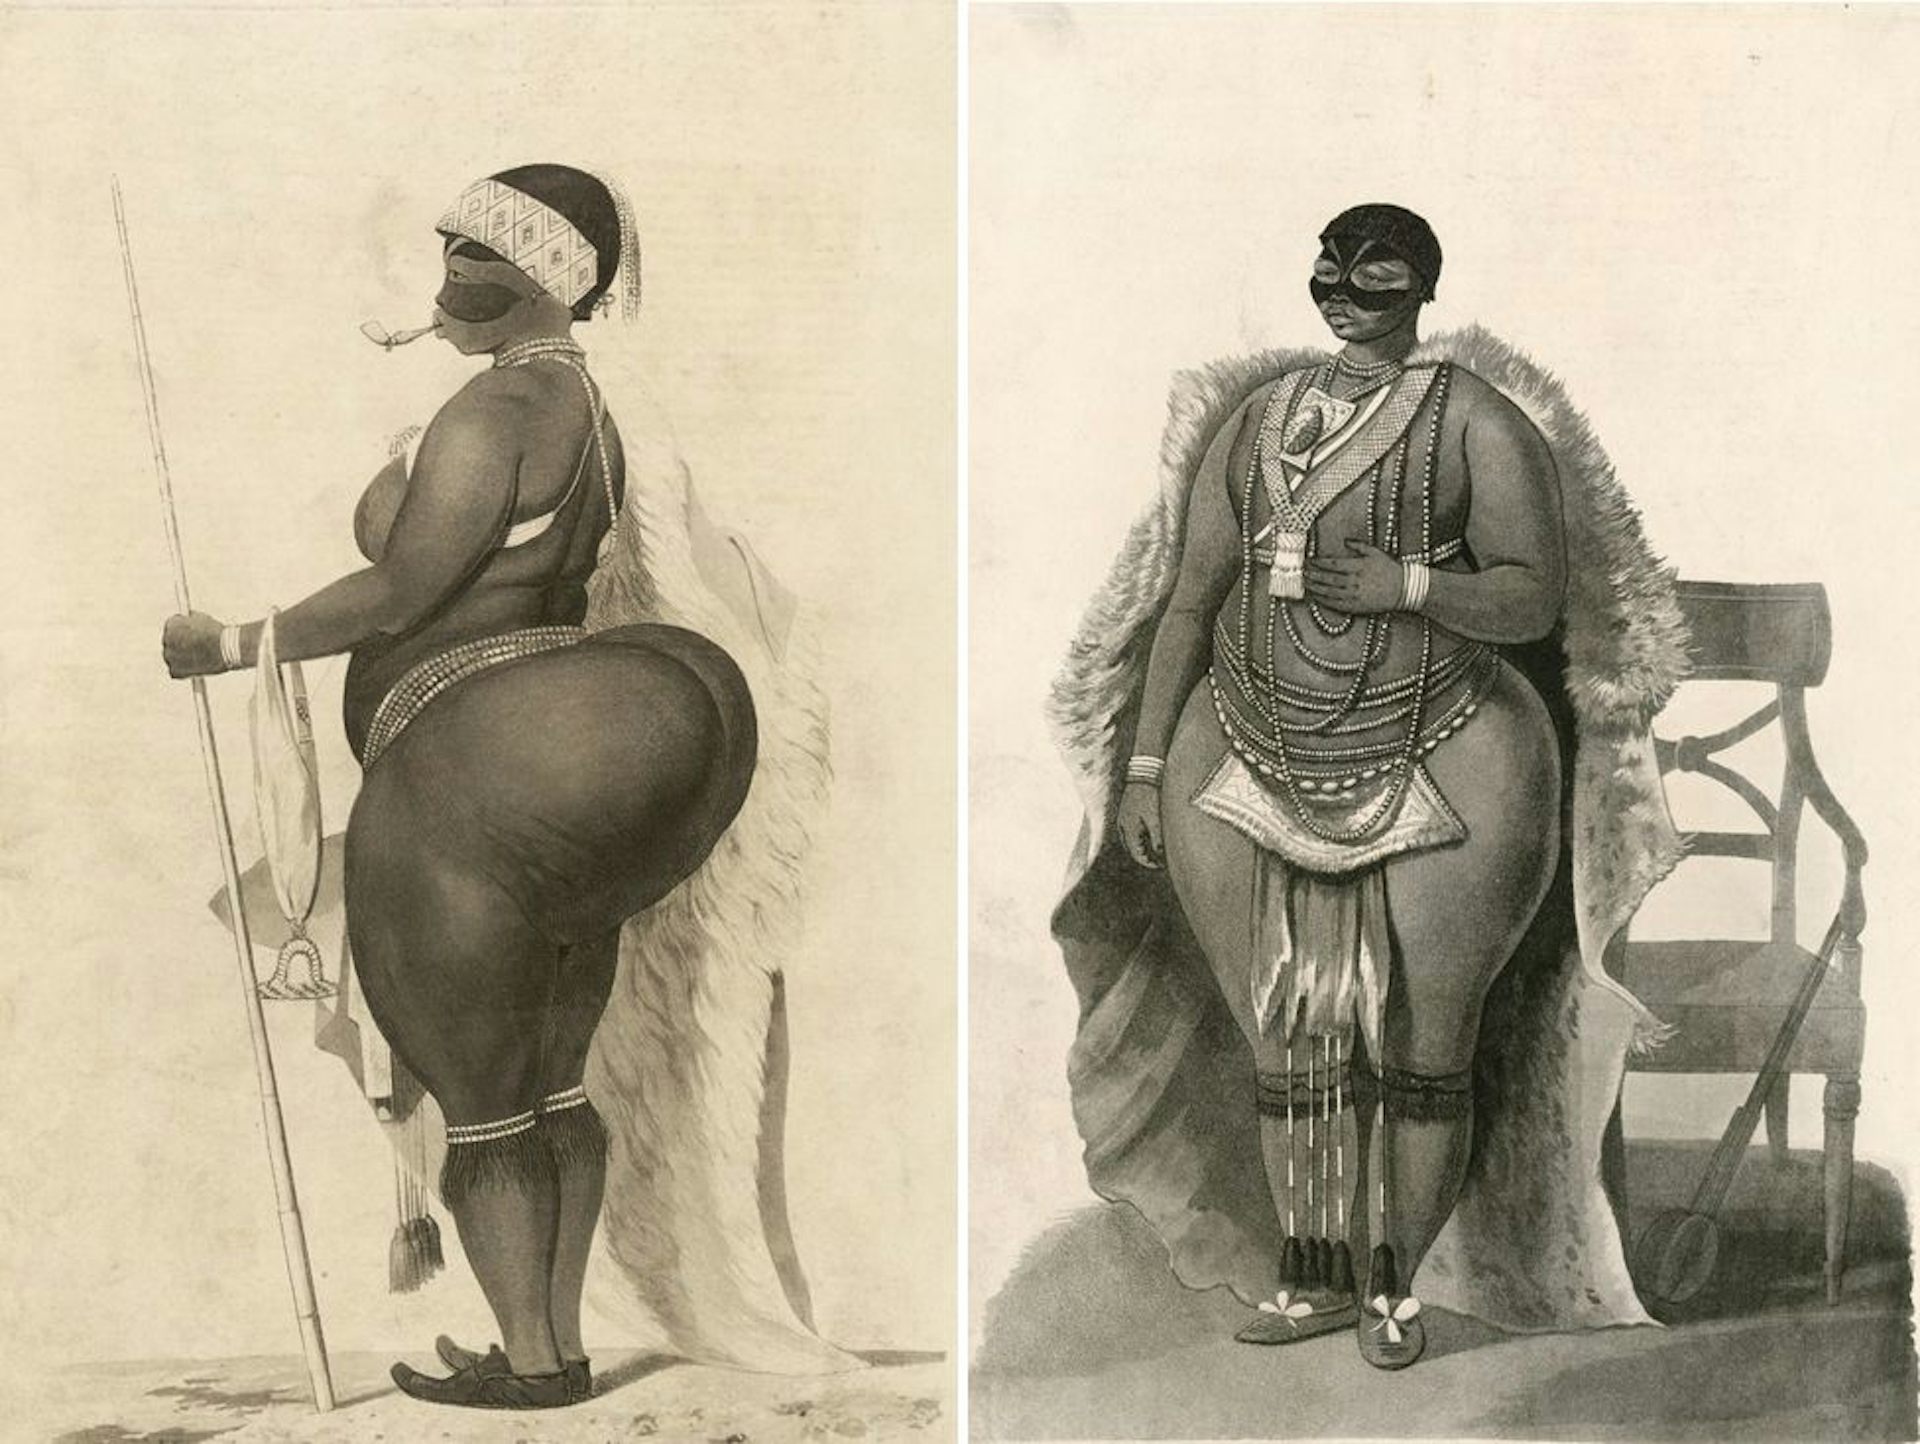 How Sarah Baartmans hips went from a symbol of exploitation to a source of empowerment for Black women image